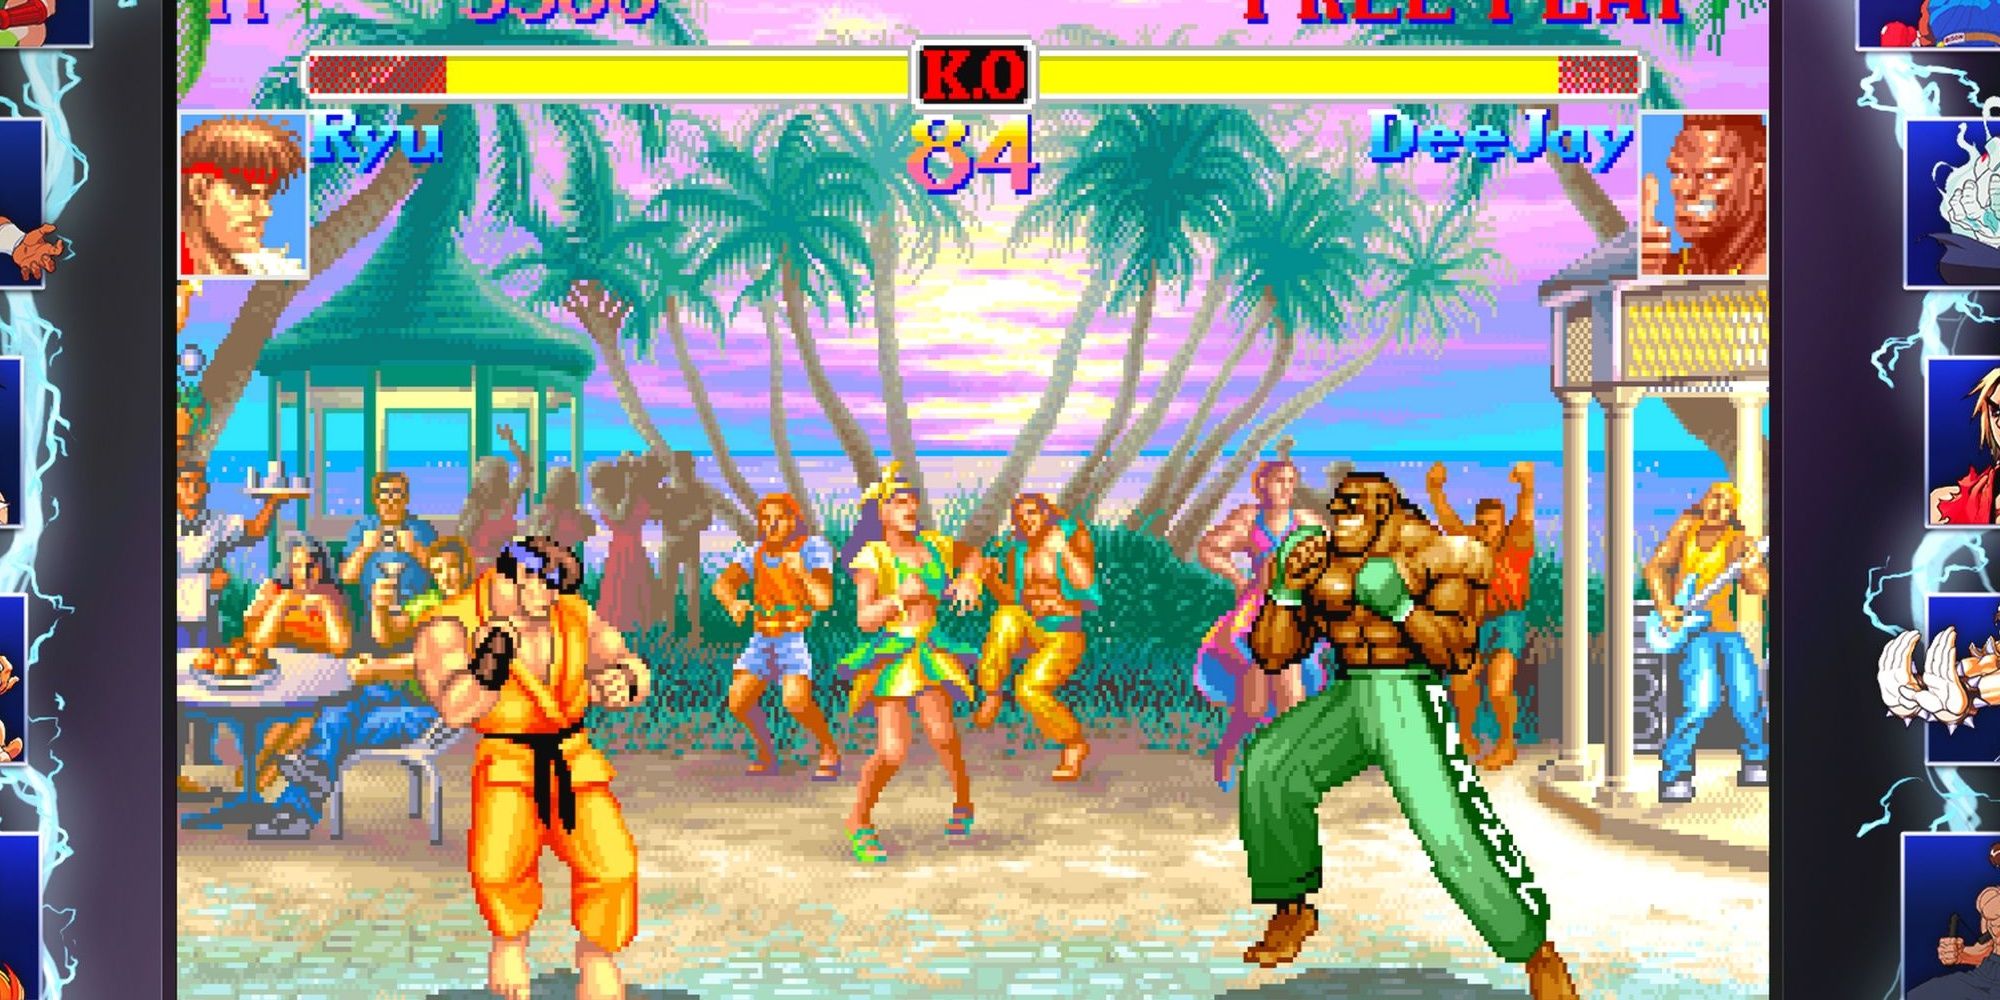 Ryu fighting against Dee Jay in Super Street Fighter 2 Turbo.